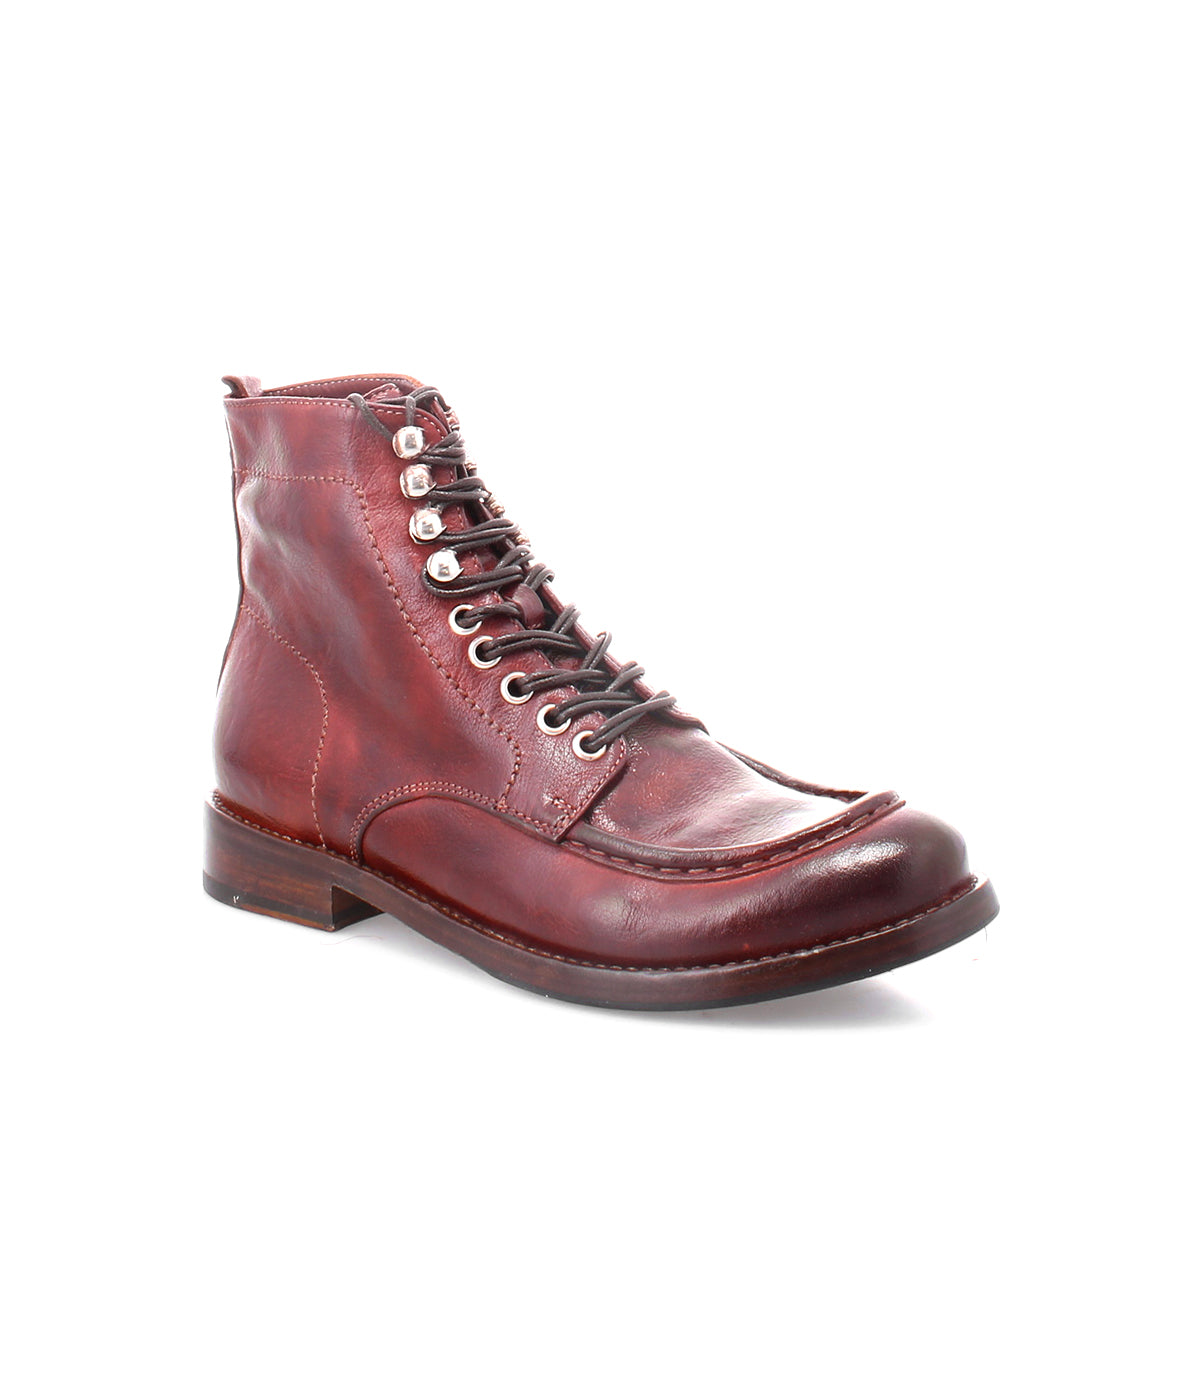 A pair of Bed Stu Blimey burgundy leather boots.